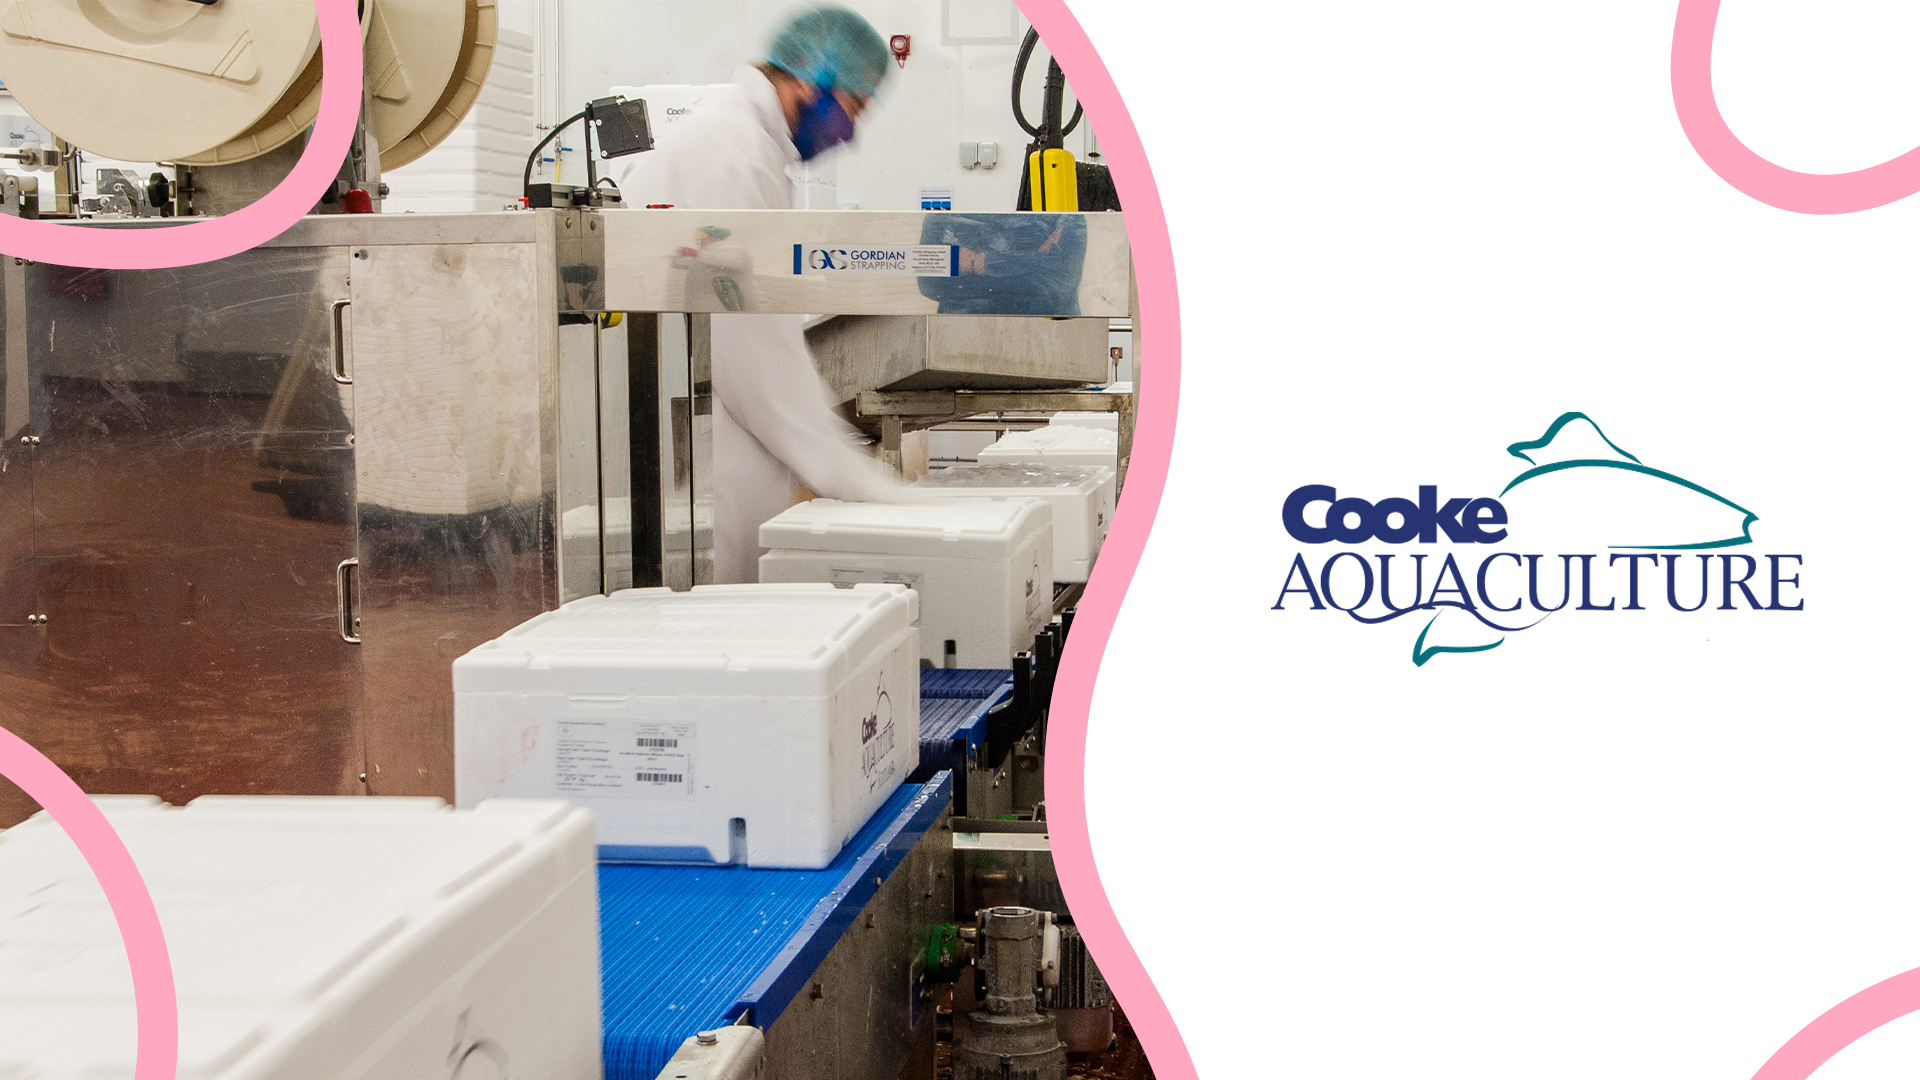 Case Study - Successful Salmon Processing Gets a New Upgrade